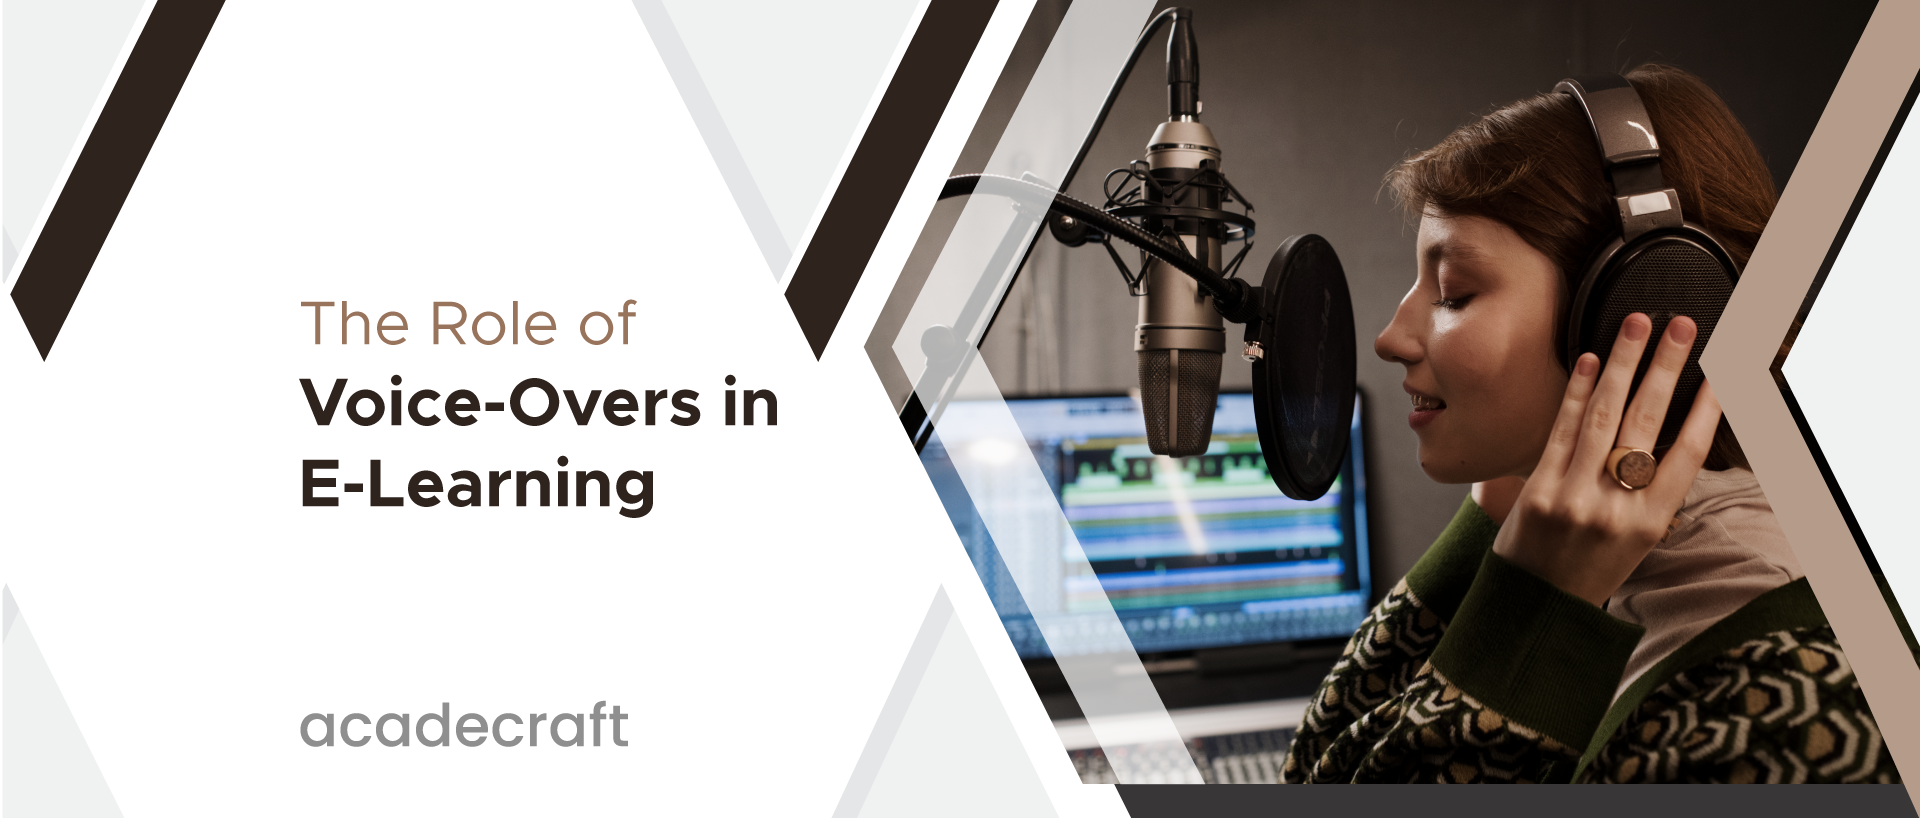 The Role of Voice-Overs in E-Learning